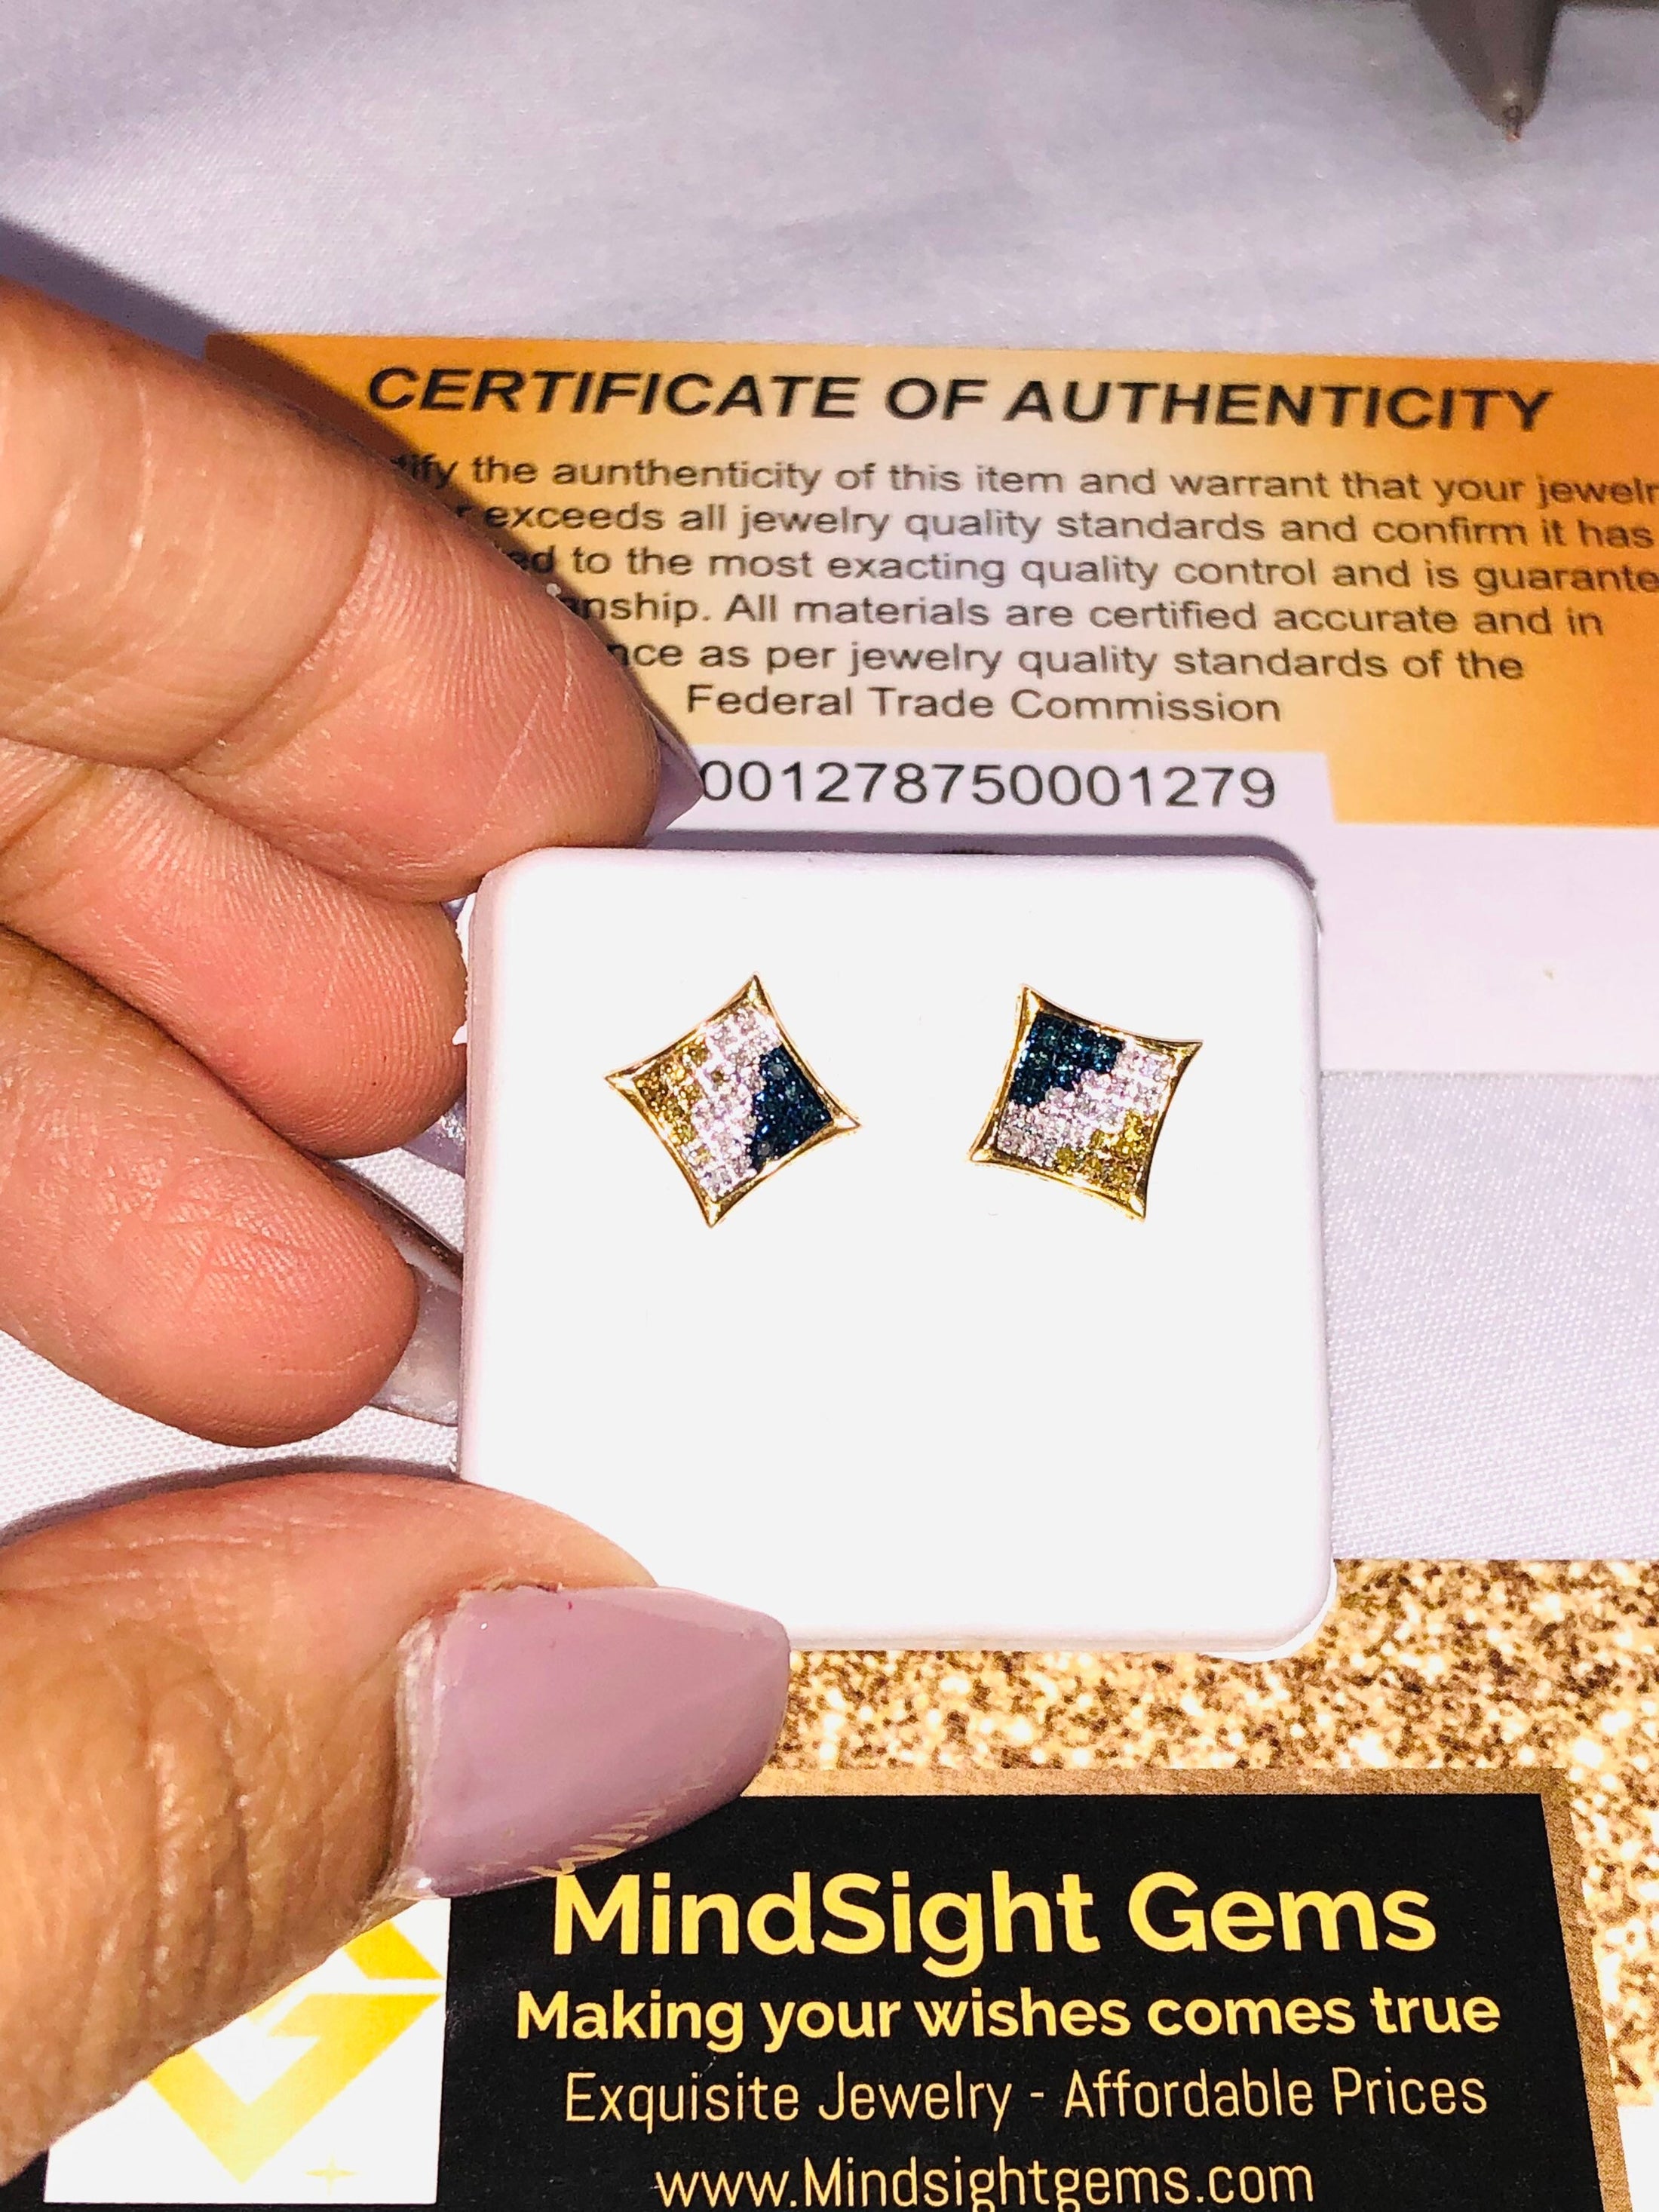 10k yellow gold vermeil 100% real genuine diamond earrings, NOT fake stones. Beautiful rare canary natural diamonds, Best gift, Christmas